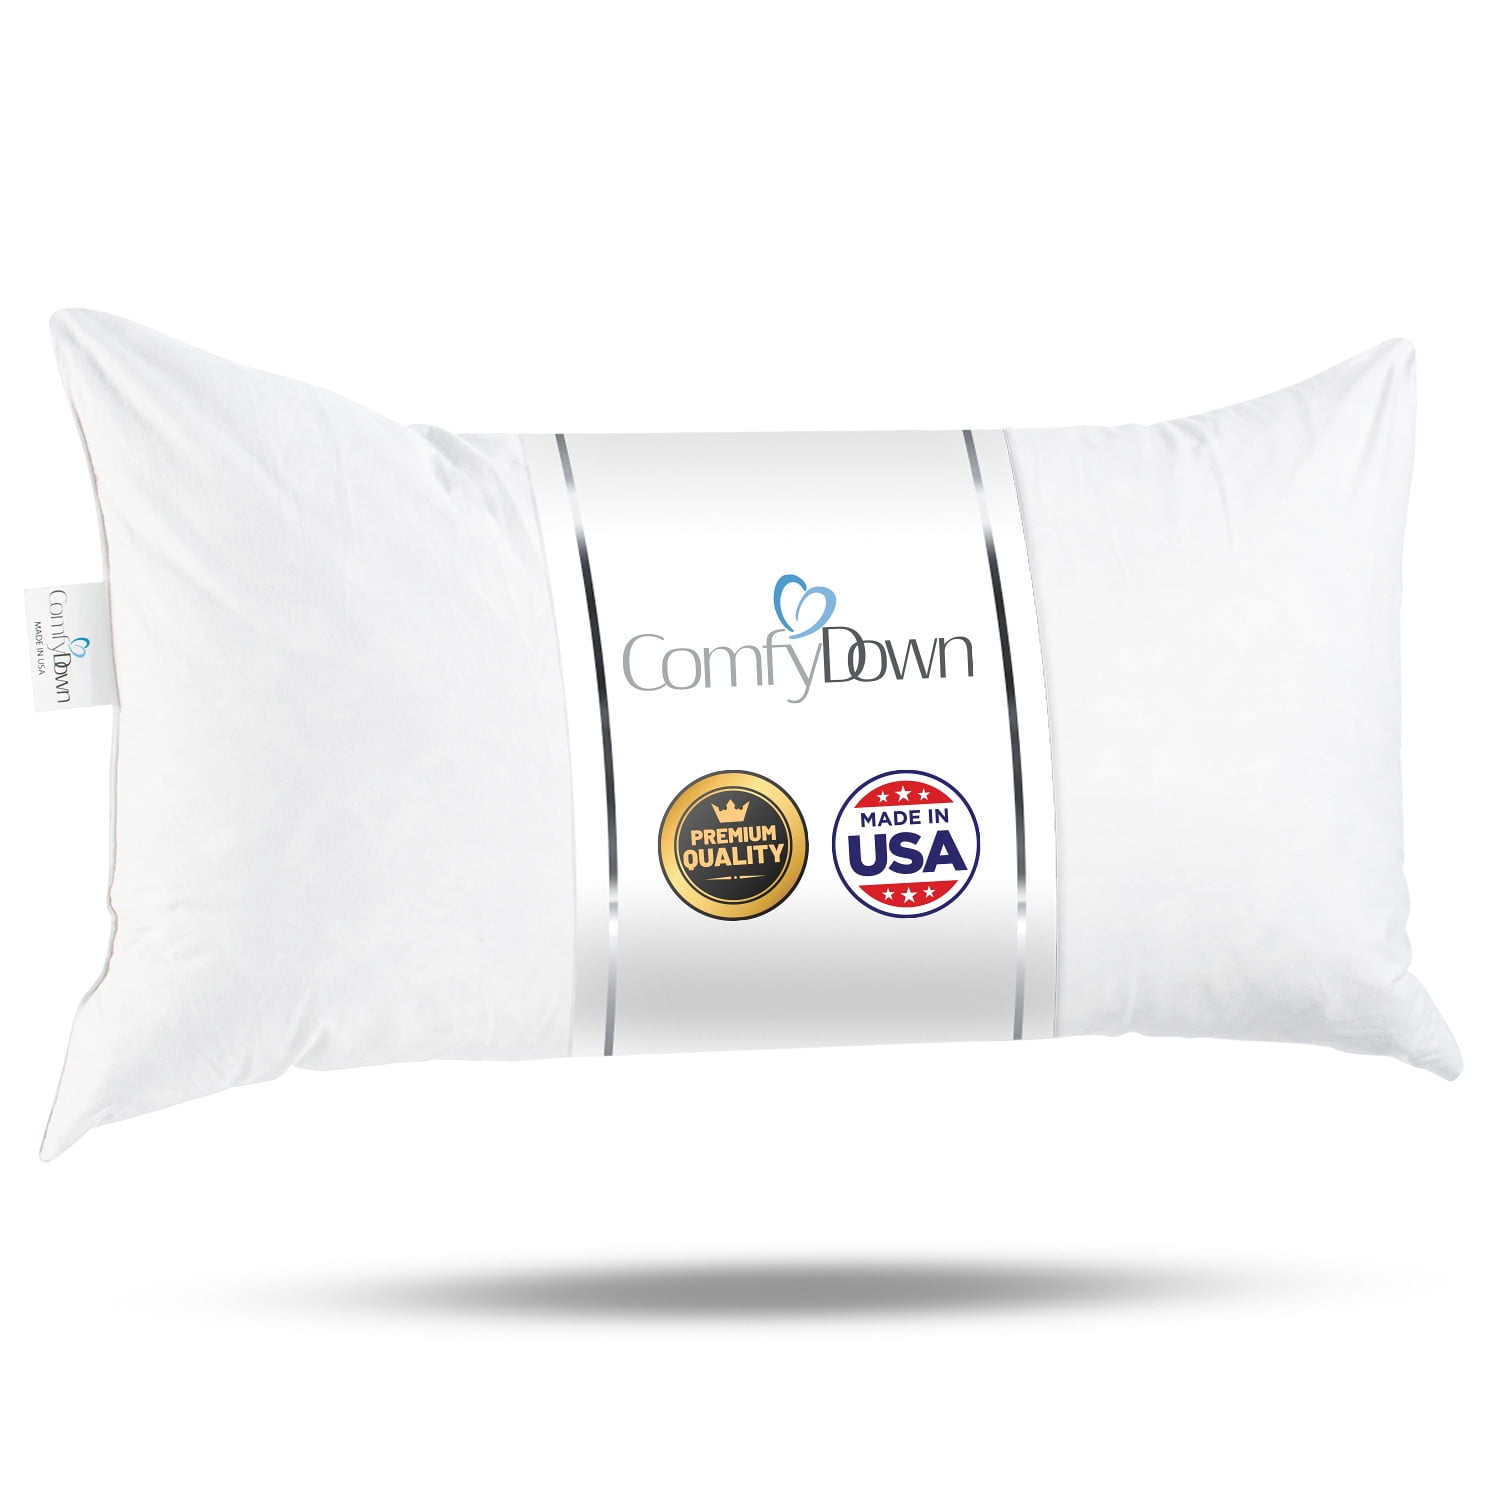 ACCENTHOME 16 x 16 Pillow Inserts, Pack of 4 Uganda